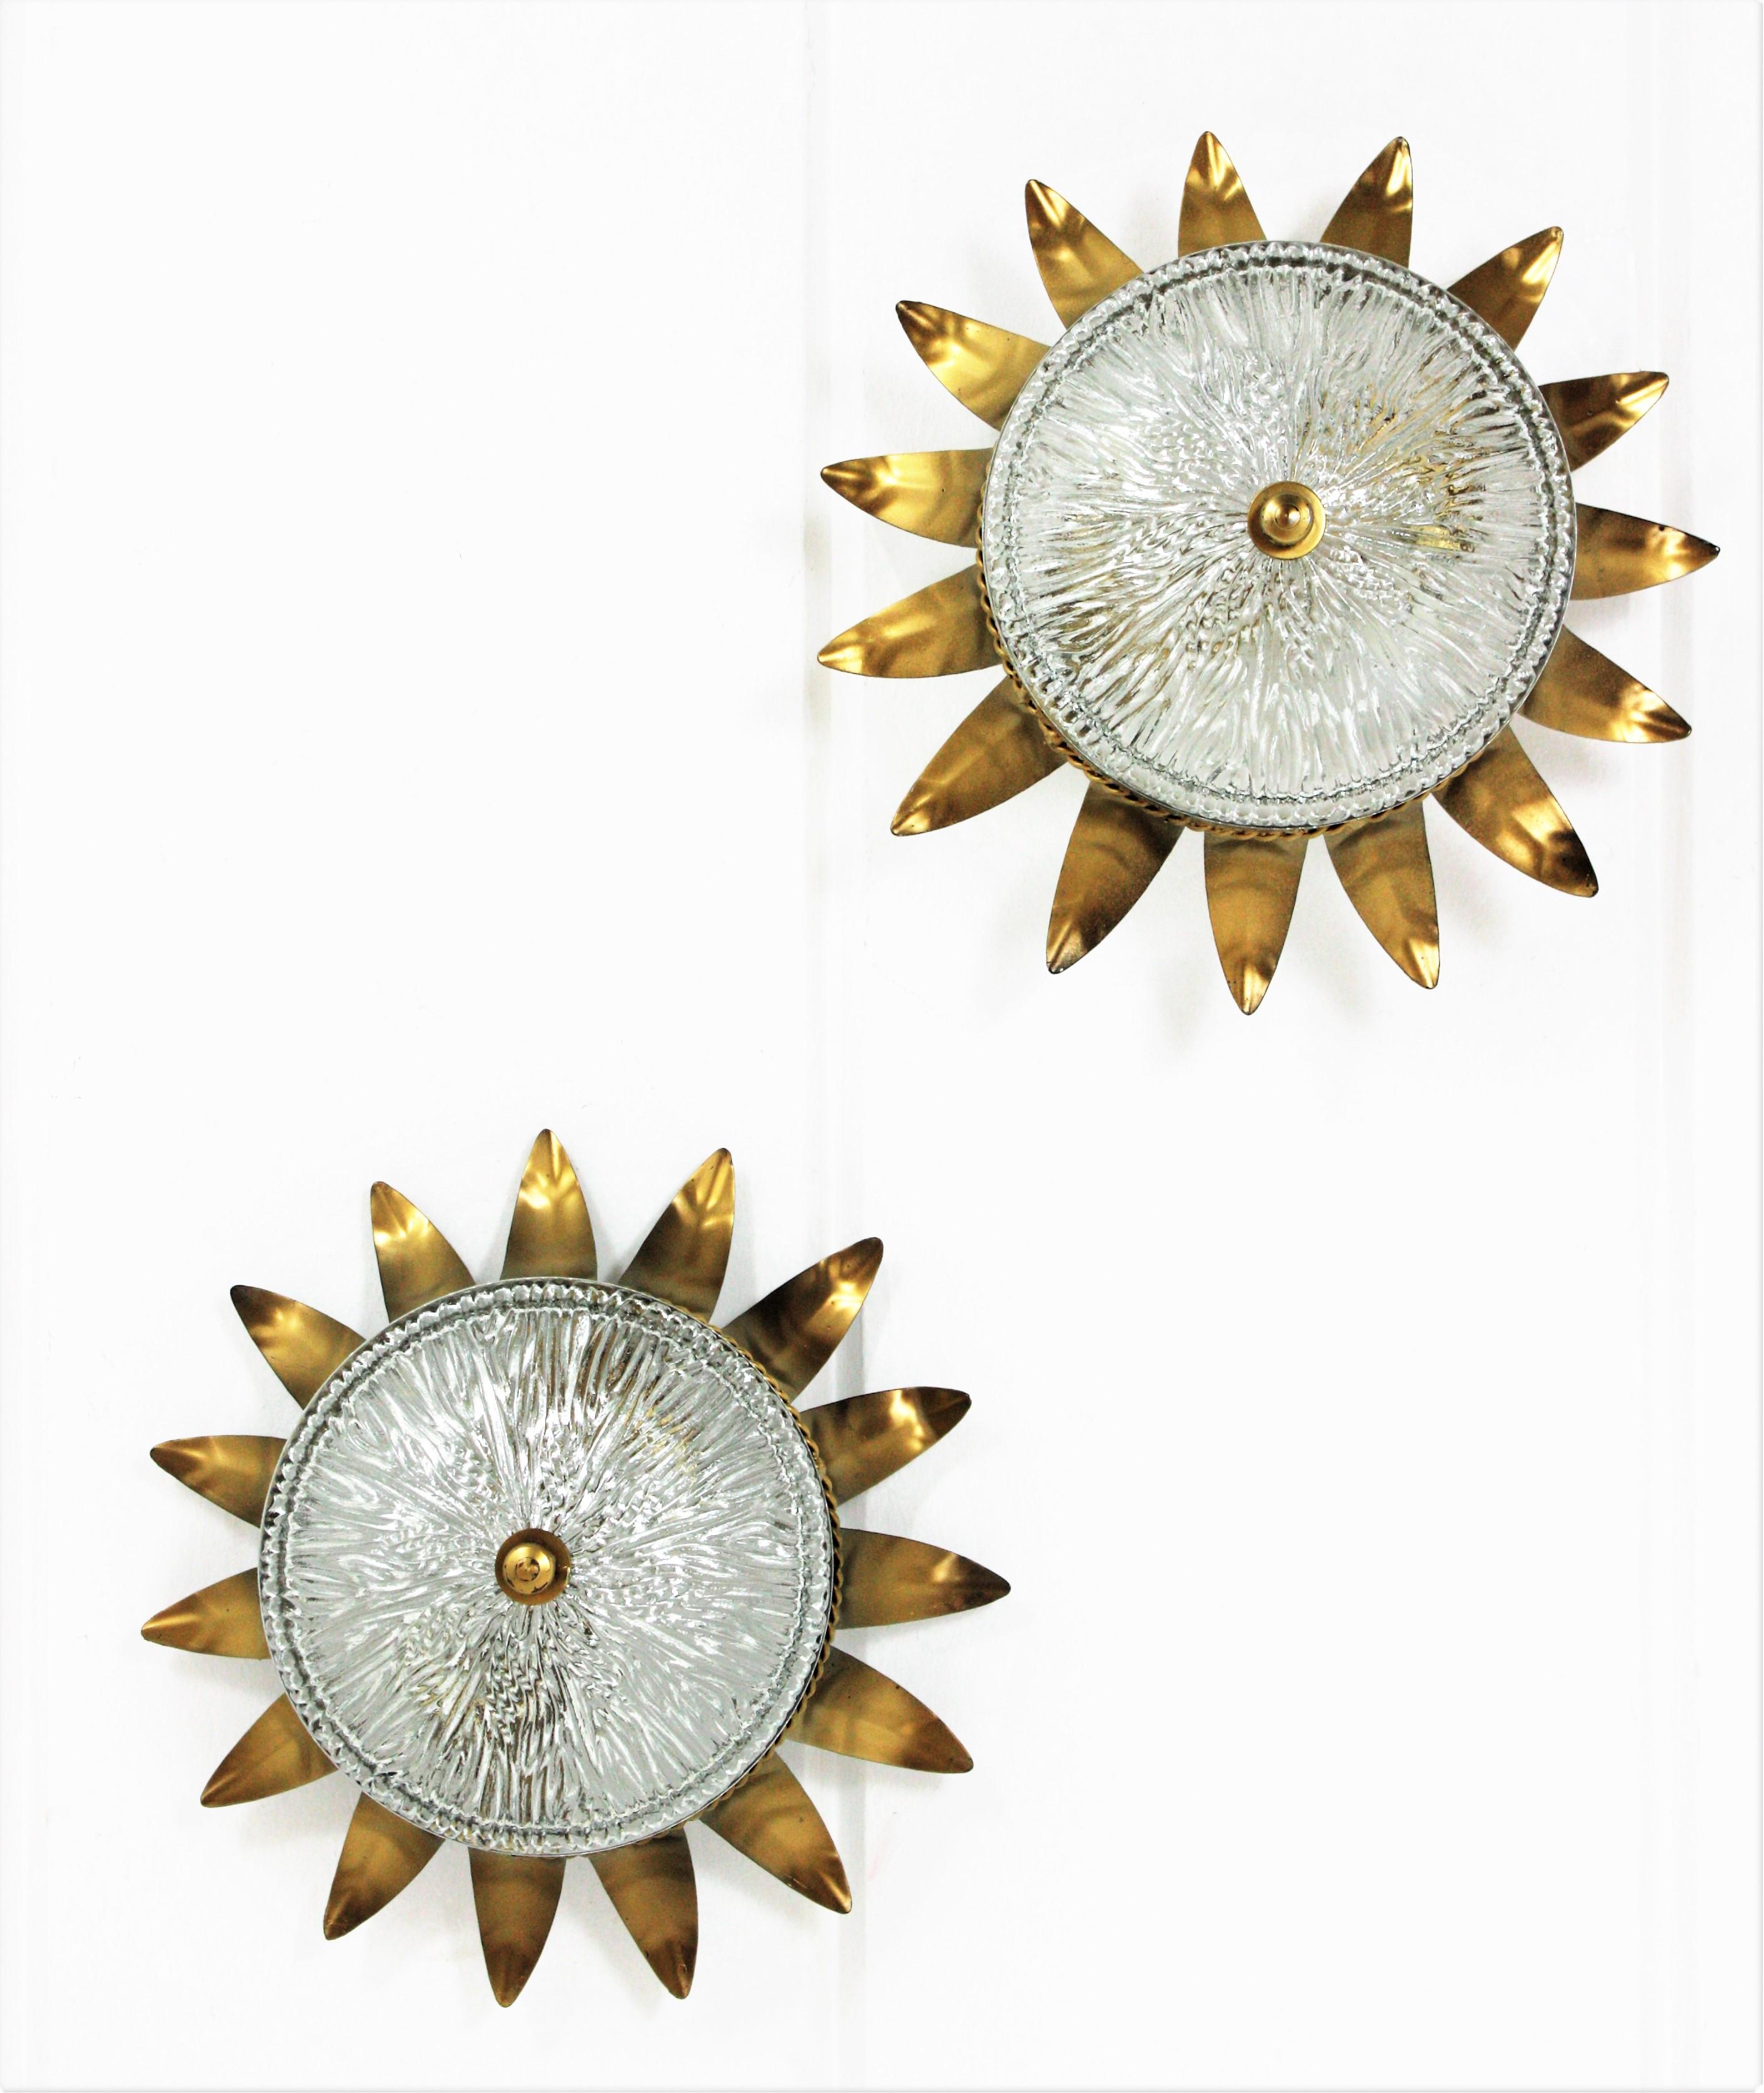 Pair of neoclassical style sunburst ceiling light fixtures from the Mid-Century Modern period, Spain, 1950s.
Both pieces feature a gilt metal sunburst crown shaped structure with a pressed glass shade with a gilt iron finial.
These flush mount